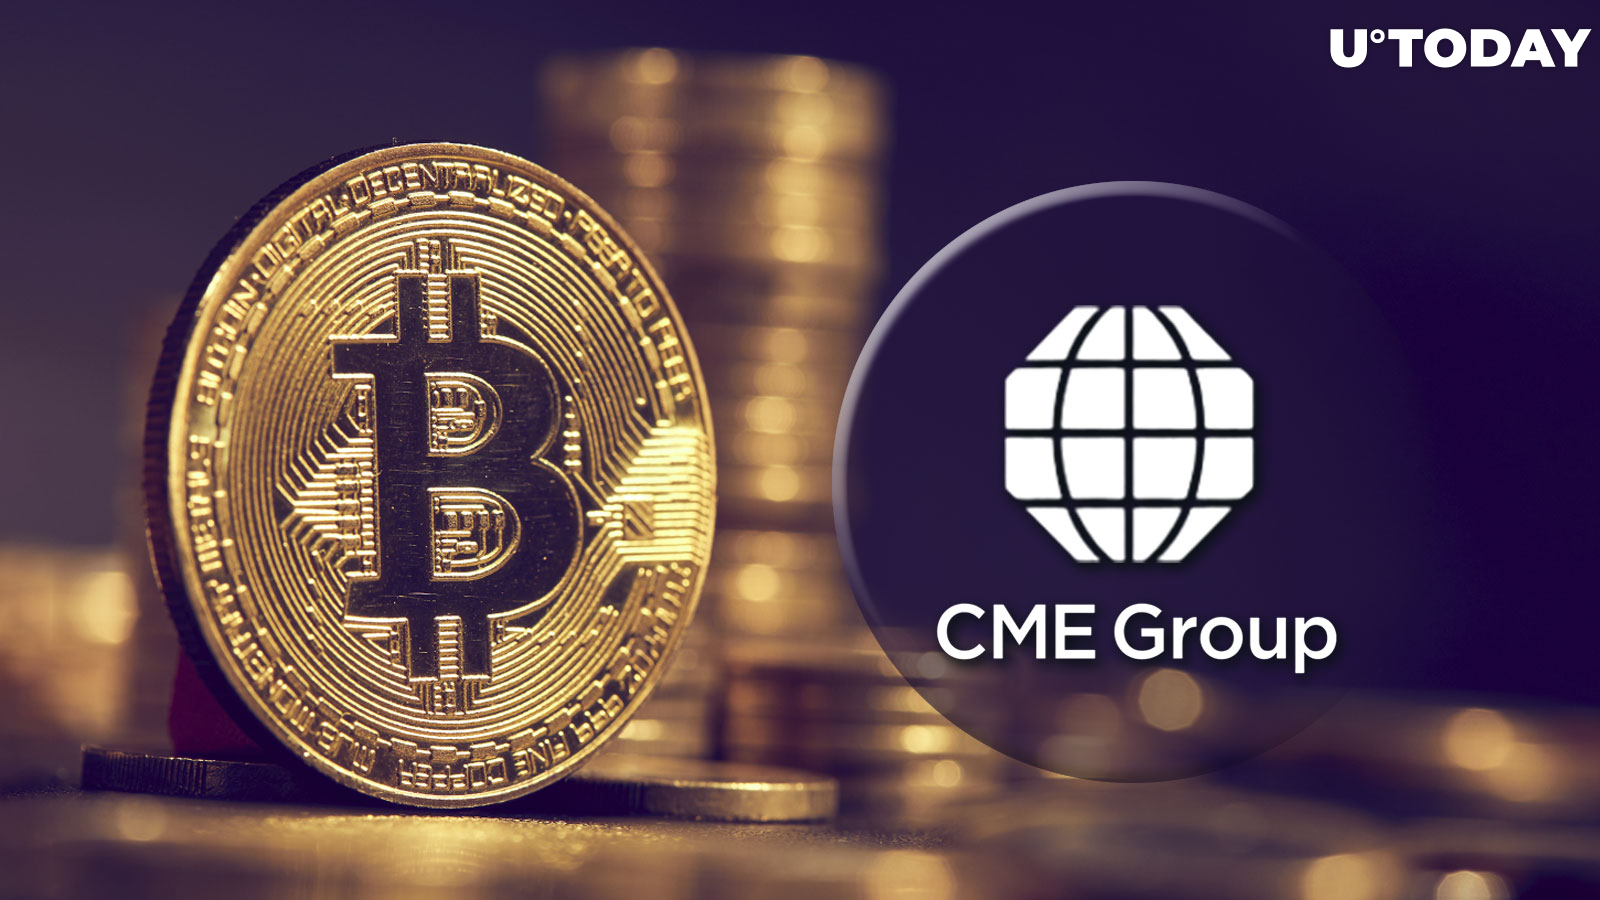 CME, Where Institutions Trade Bitcoin Futures, Flipped Binance. Is That as Bullish as It Sounds?